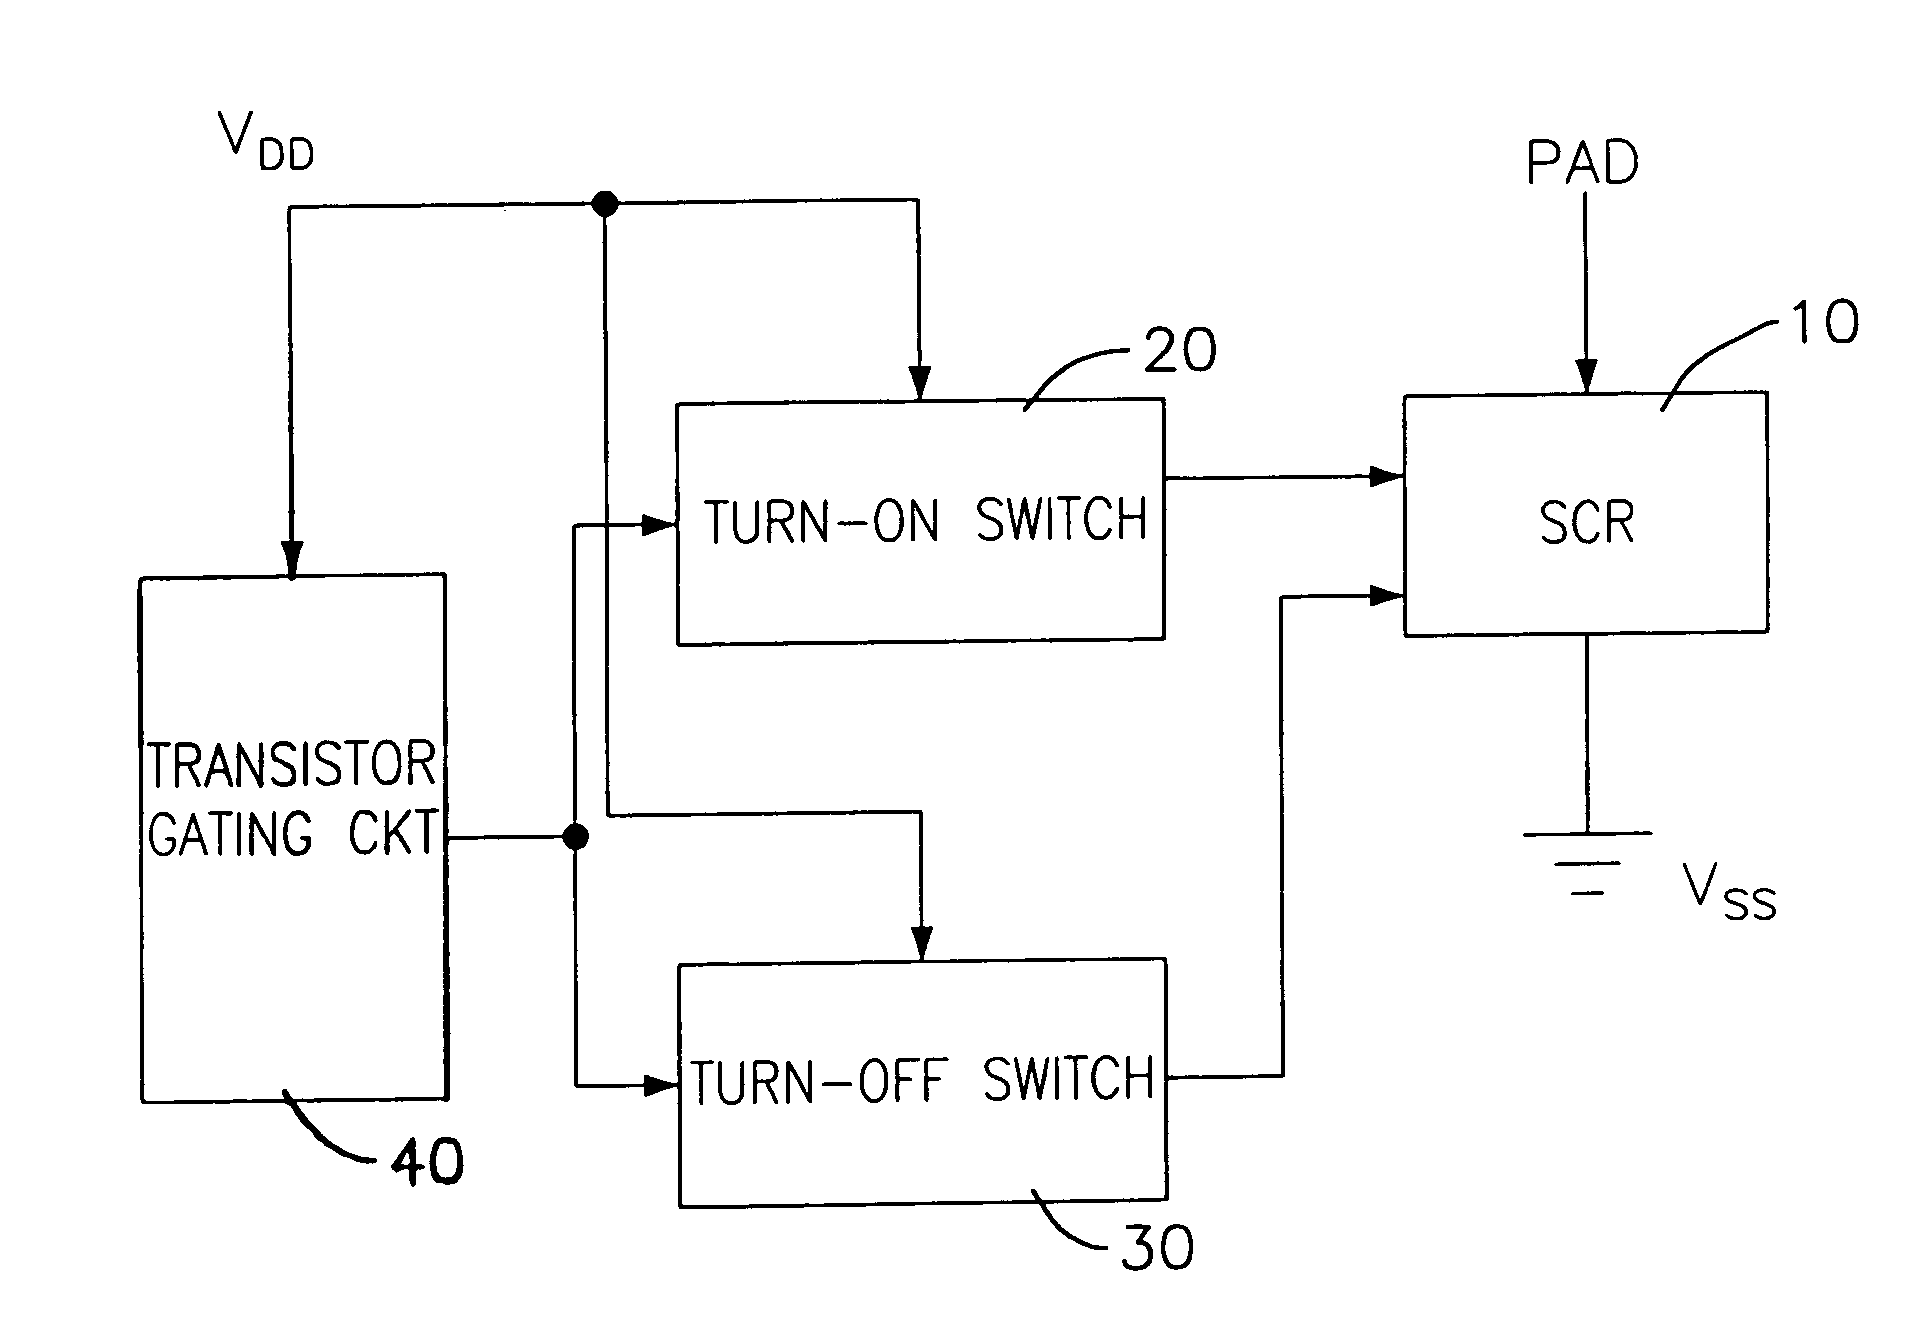 Latch-up-free ESD protection circuit using SCR